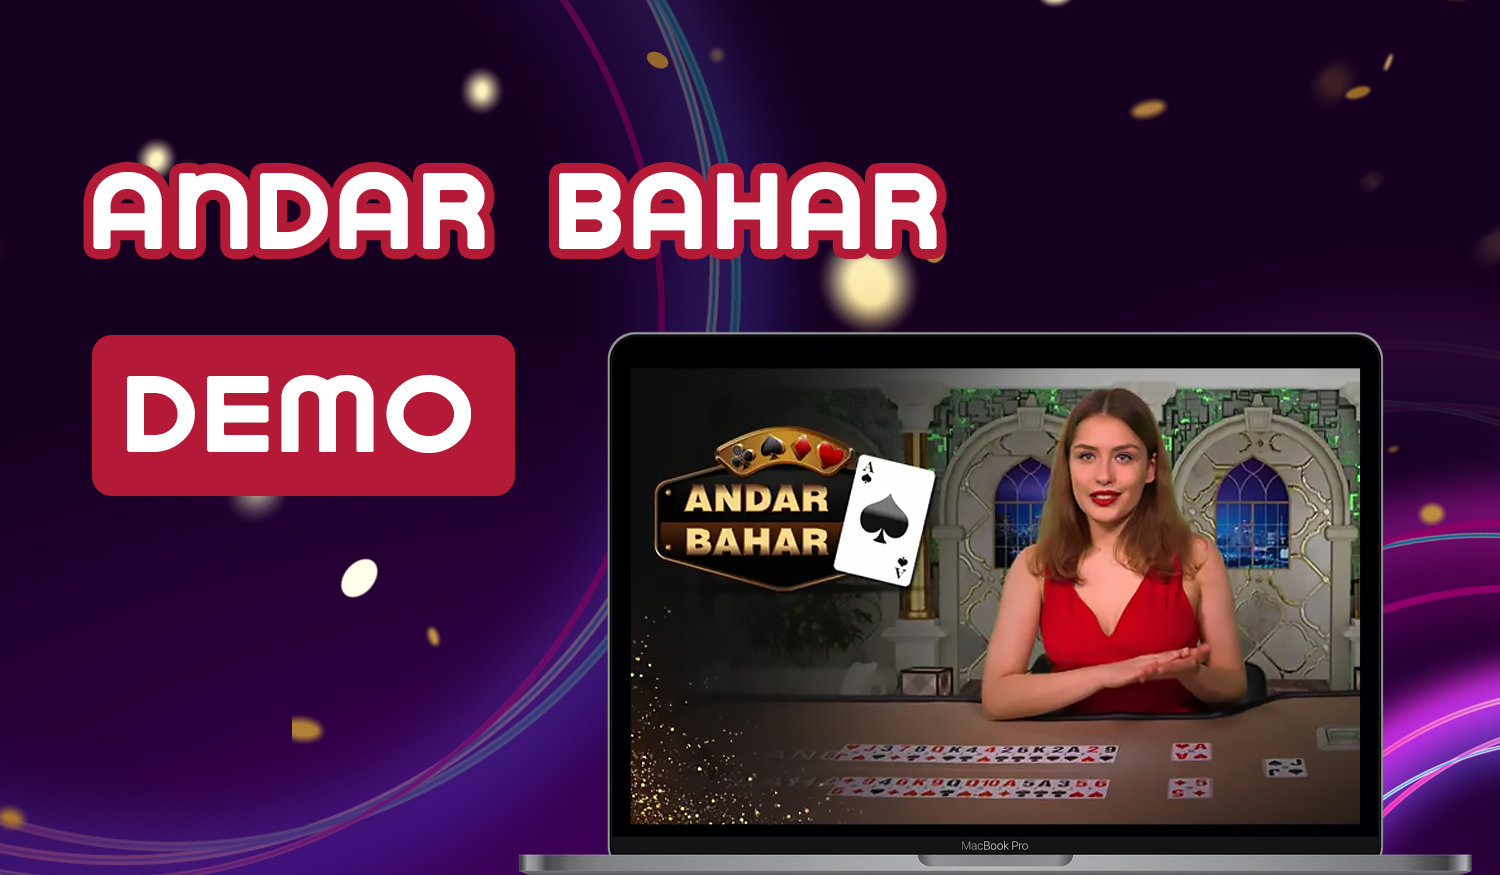 What sites can try the demo version of the game Andar Bahar